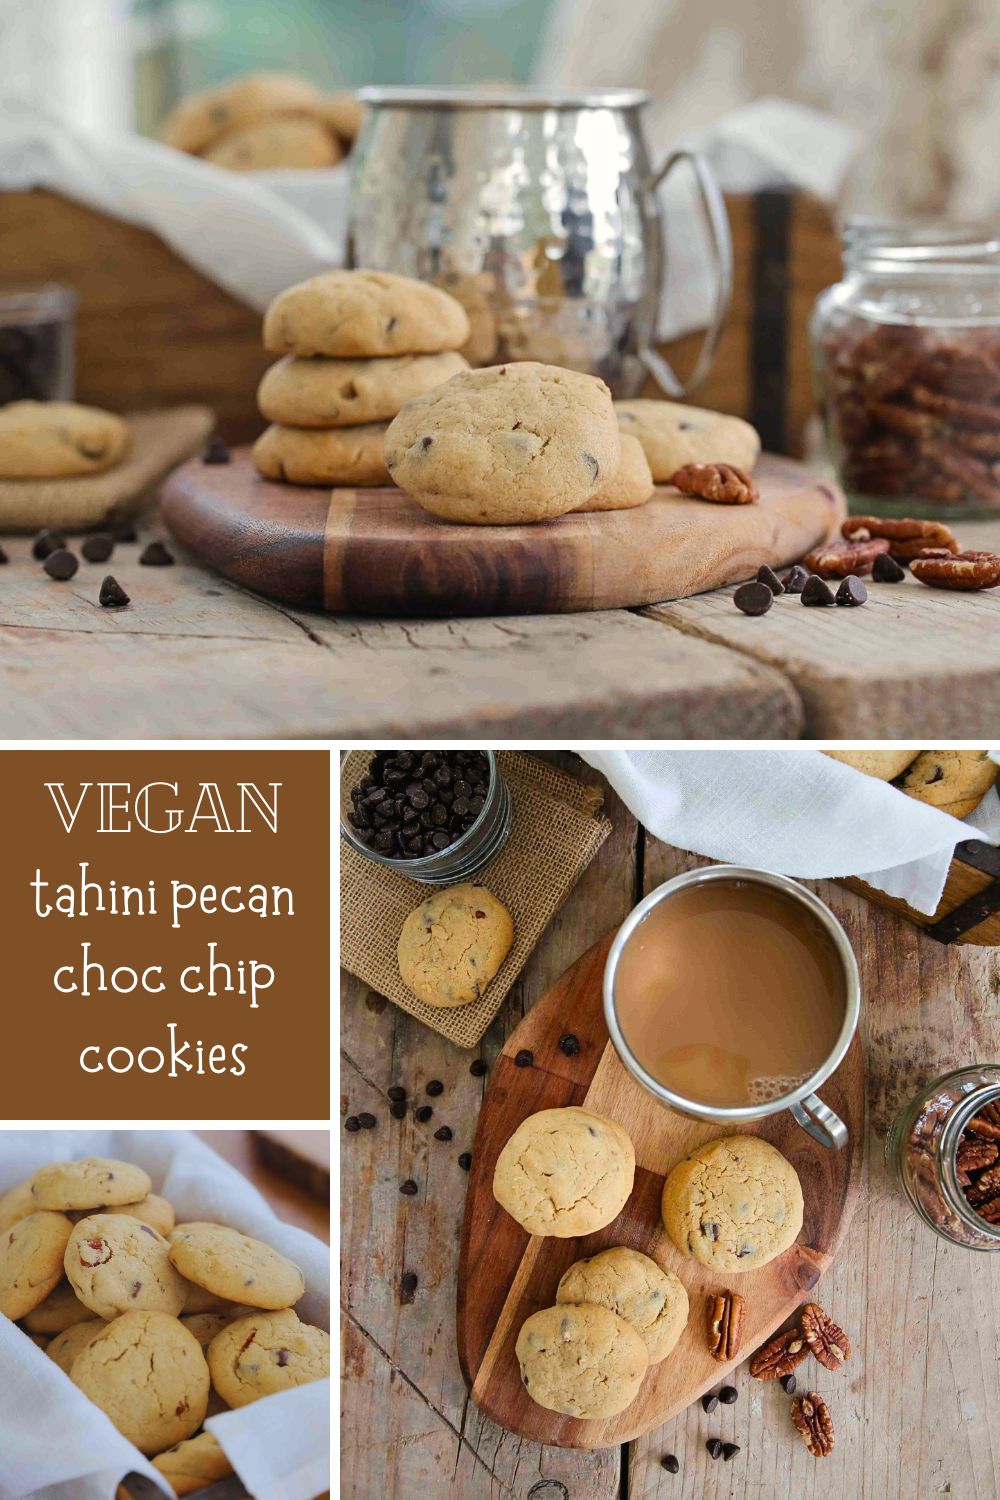 These chewy vegan choc chip cookies with tahini and pecans are super easy to make with simple ingredients and take less than 15 minutes to bake! Recipe on thecookandhim | #vegancookies #veganchocchipcookies #brownsugarcookies #chewychocchipcookies #egglesscookies